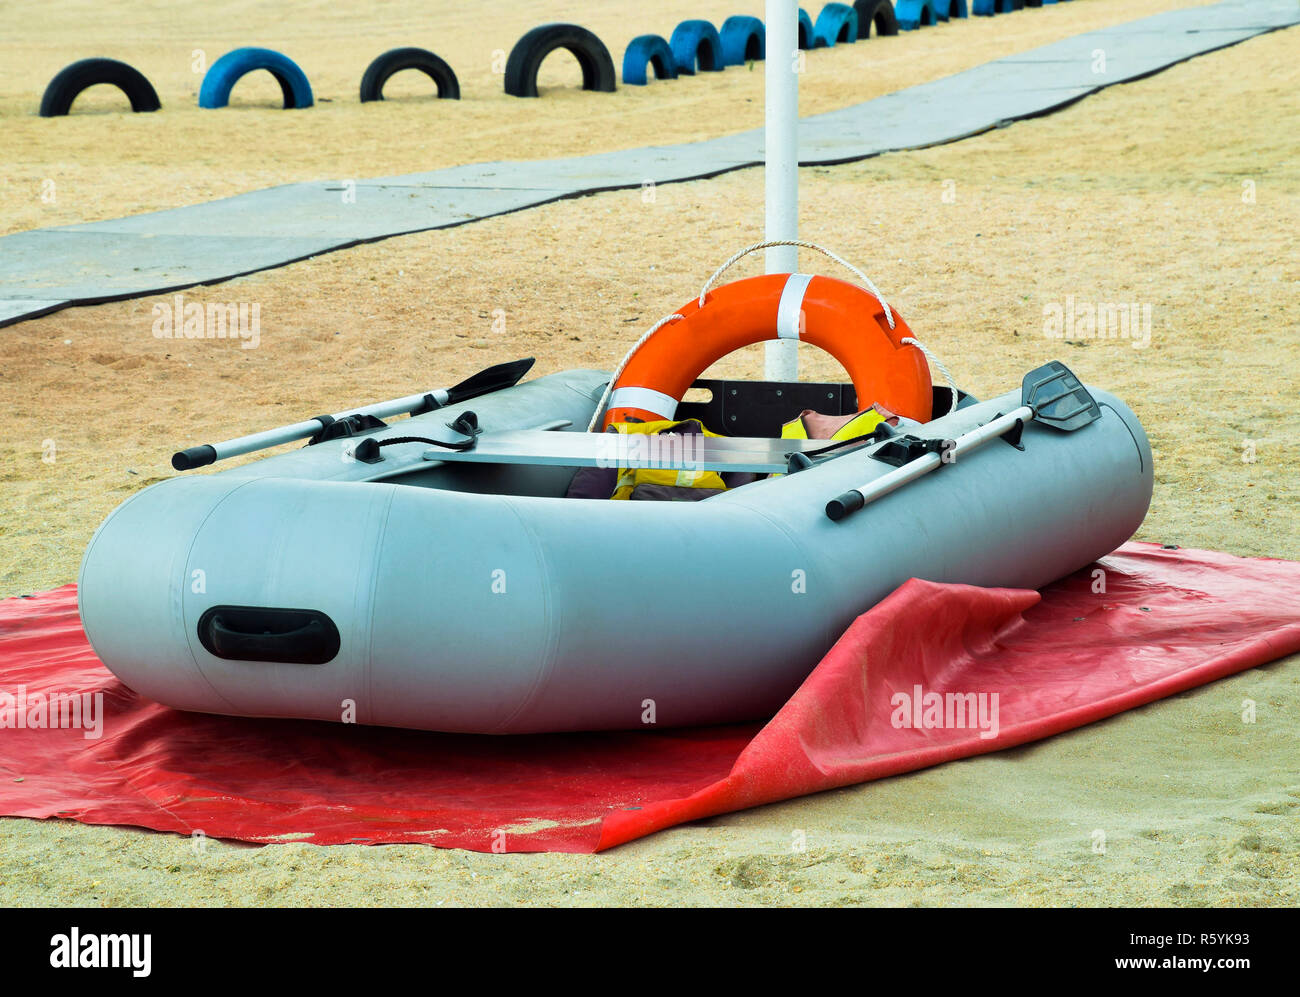 Inflatable Rescue Boat. Gray inflatable boat on the beach in the Stock Photo